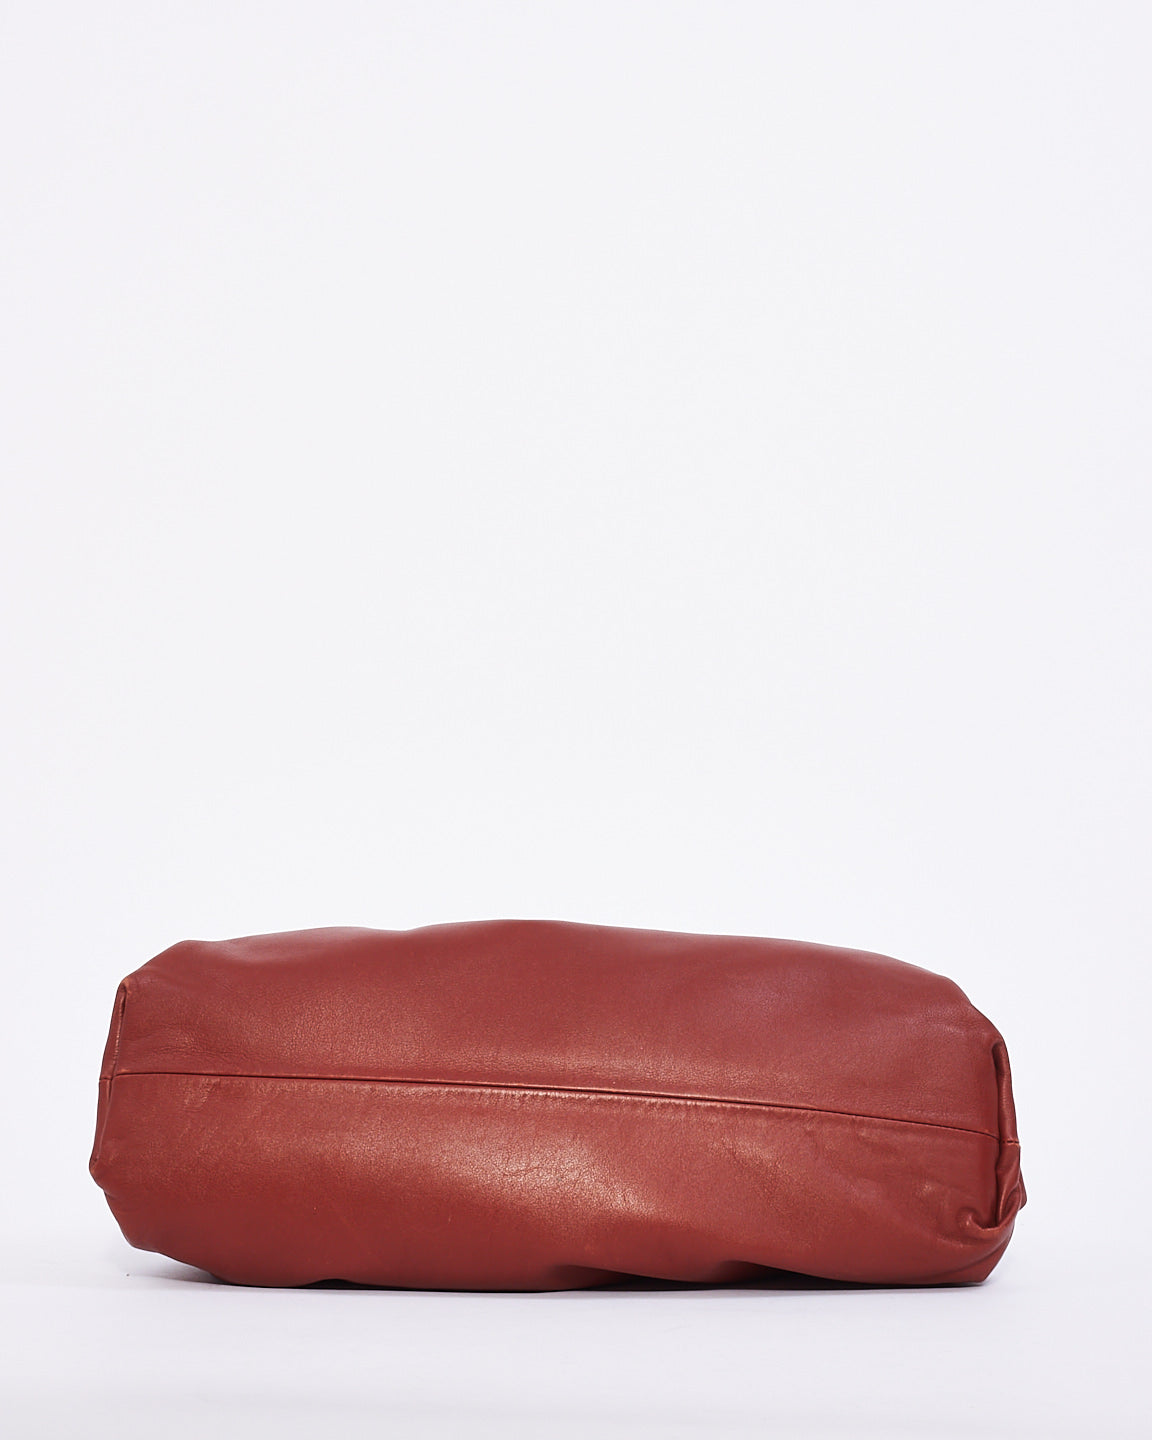 Bottega Rust Leather The Pouch Clutch Bag